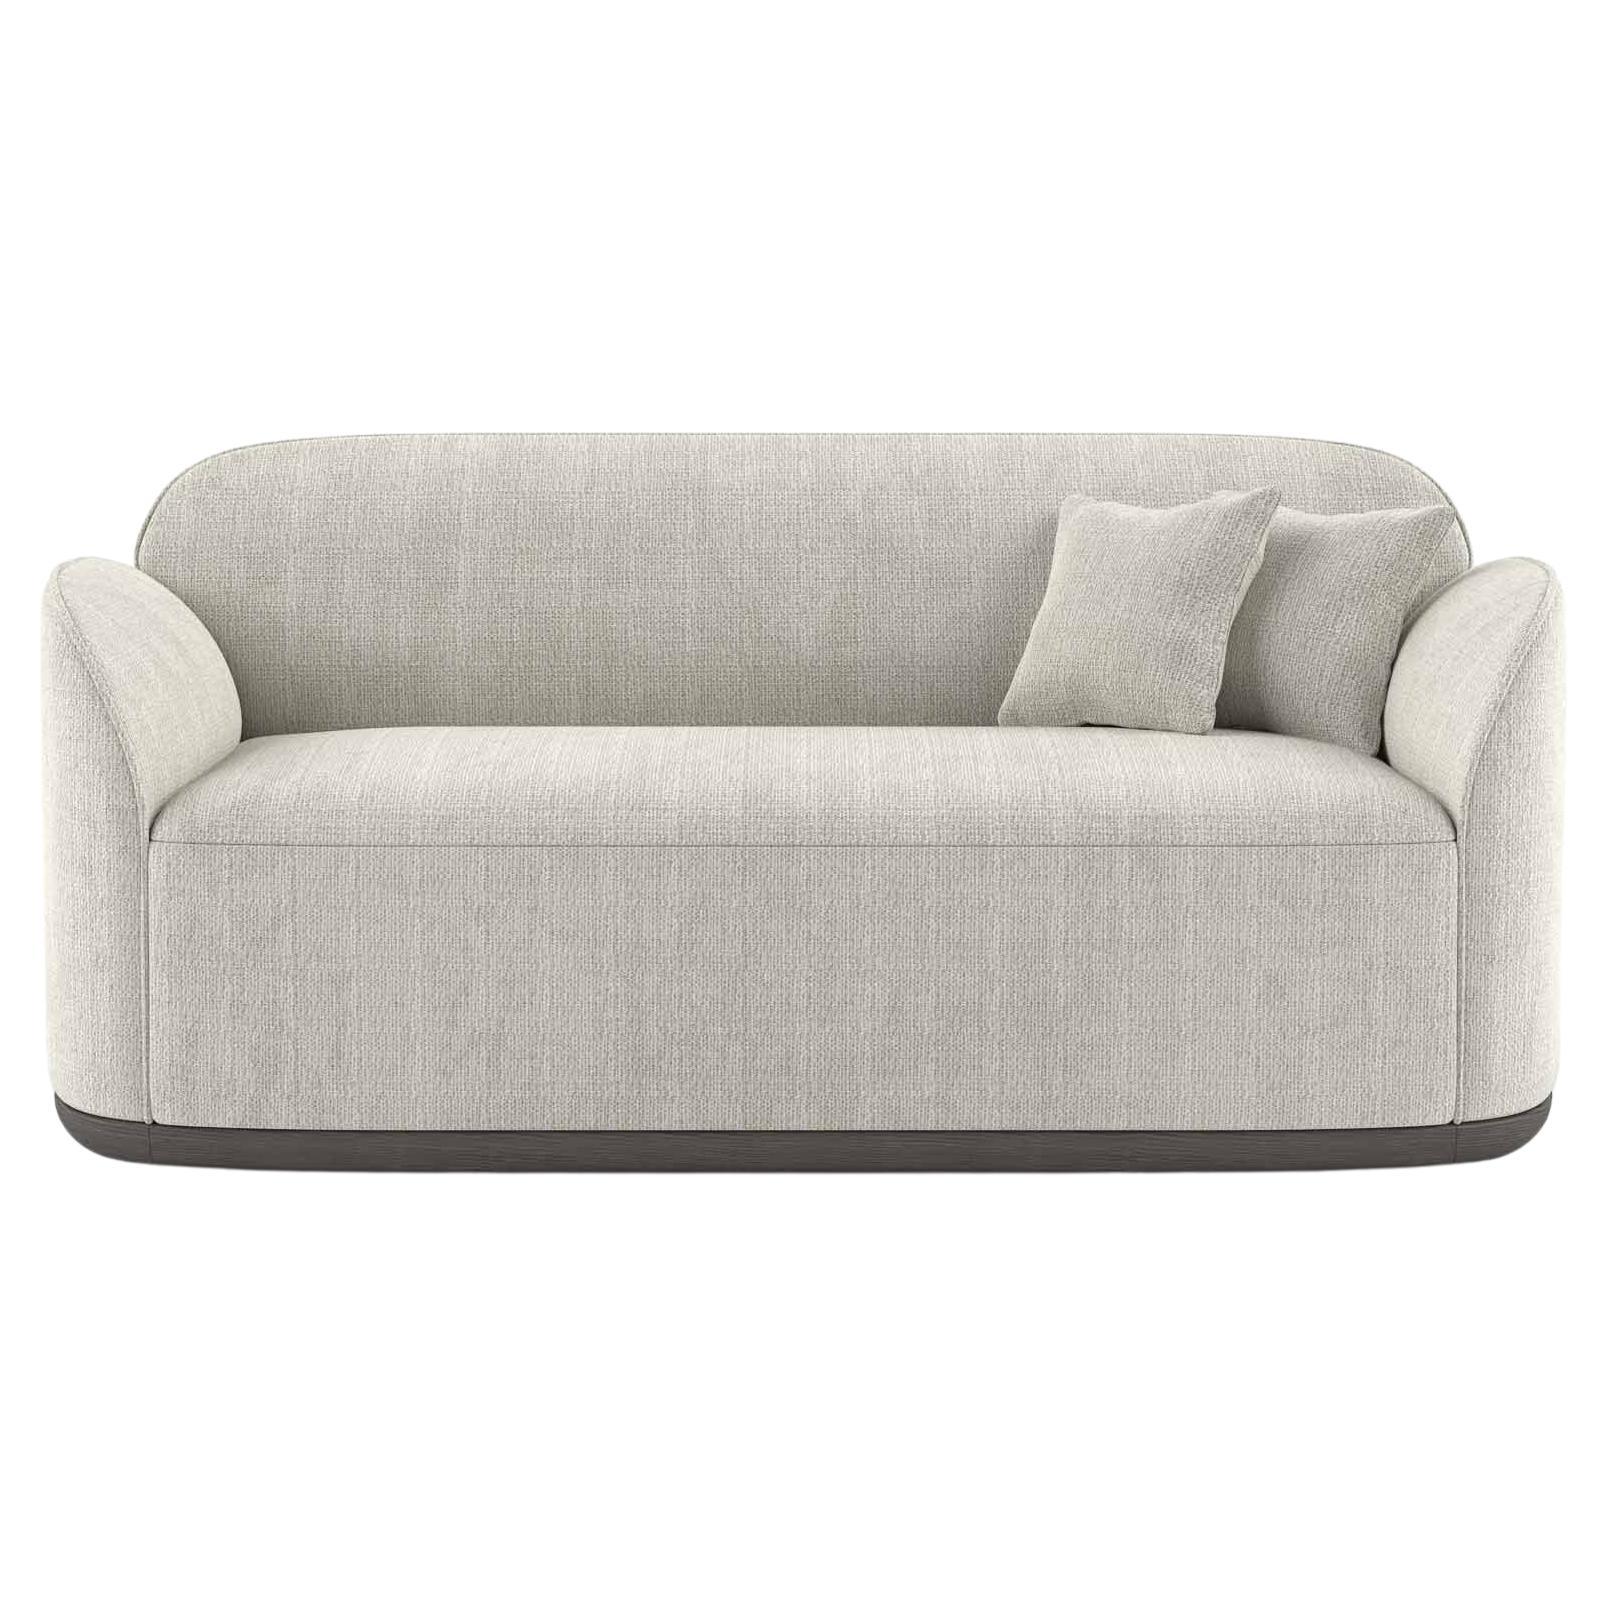 Unio Loveseat Upholstered with Larsen Fox Fabric by Poiat For Sale